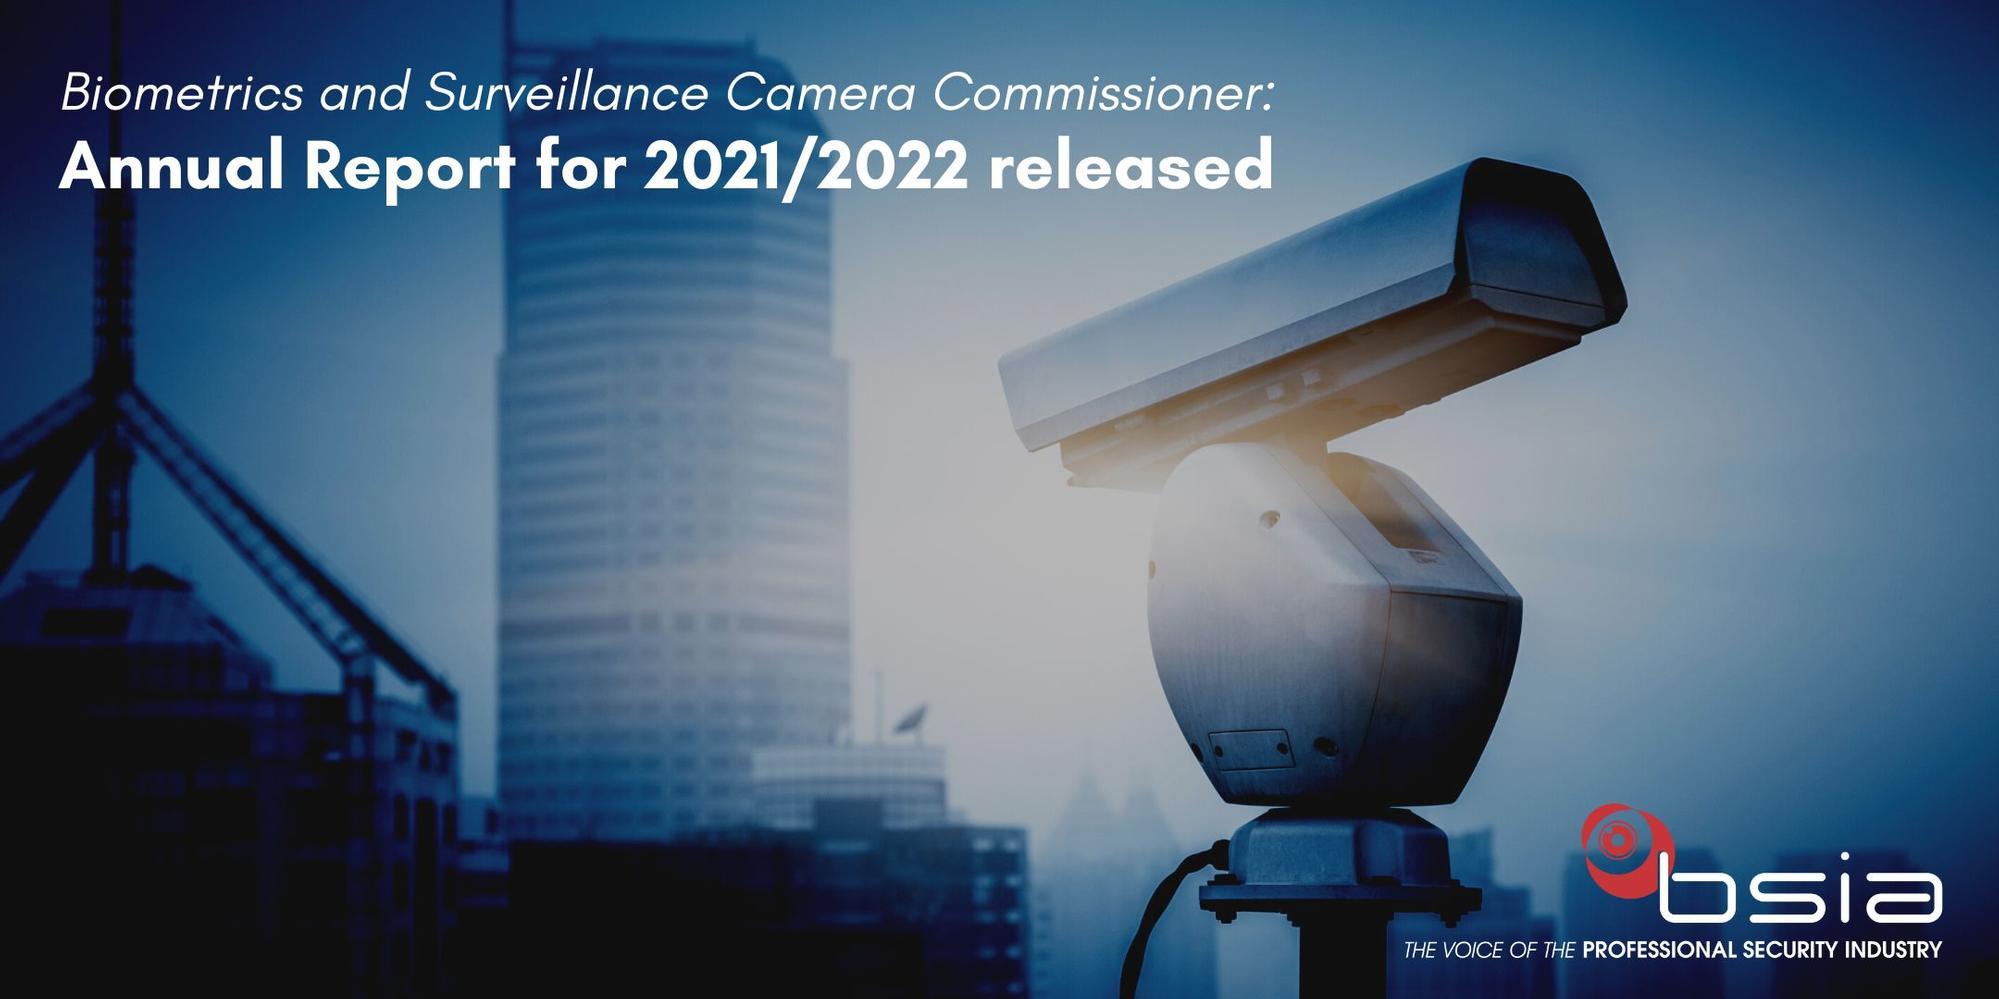 Biometrics and Surveillance Camera Commissioner’s Annual Report for 2021/2022 released